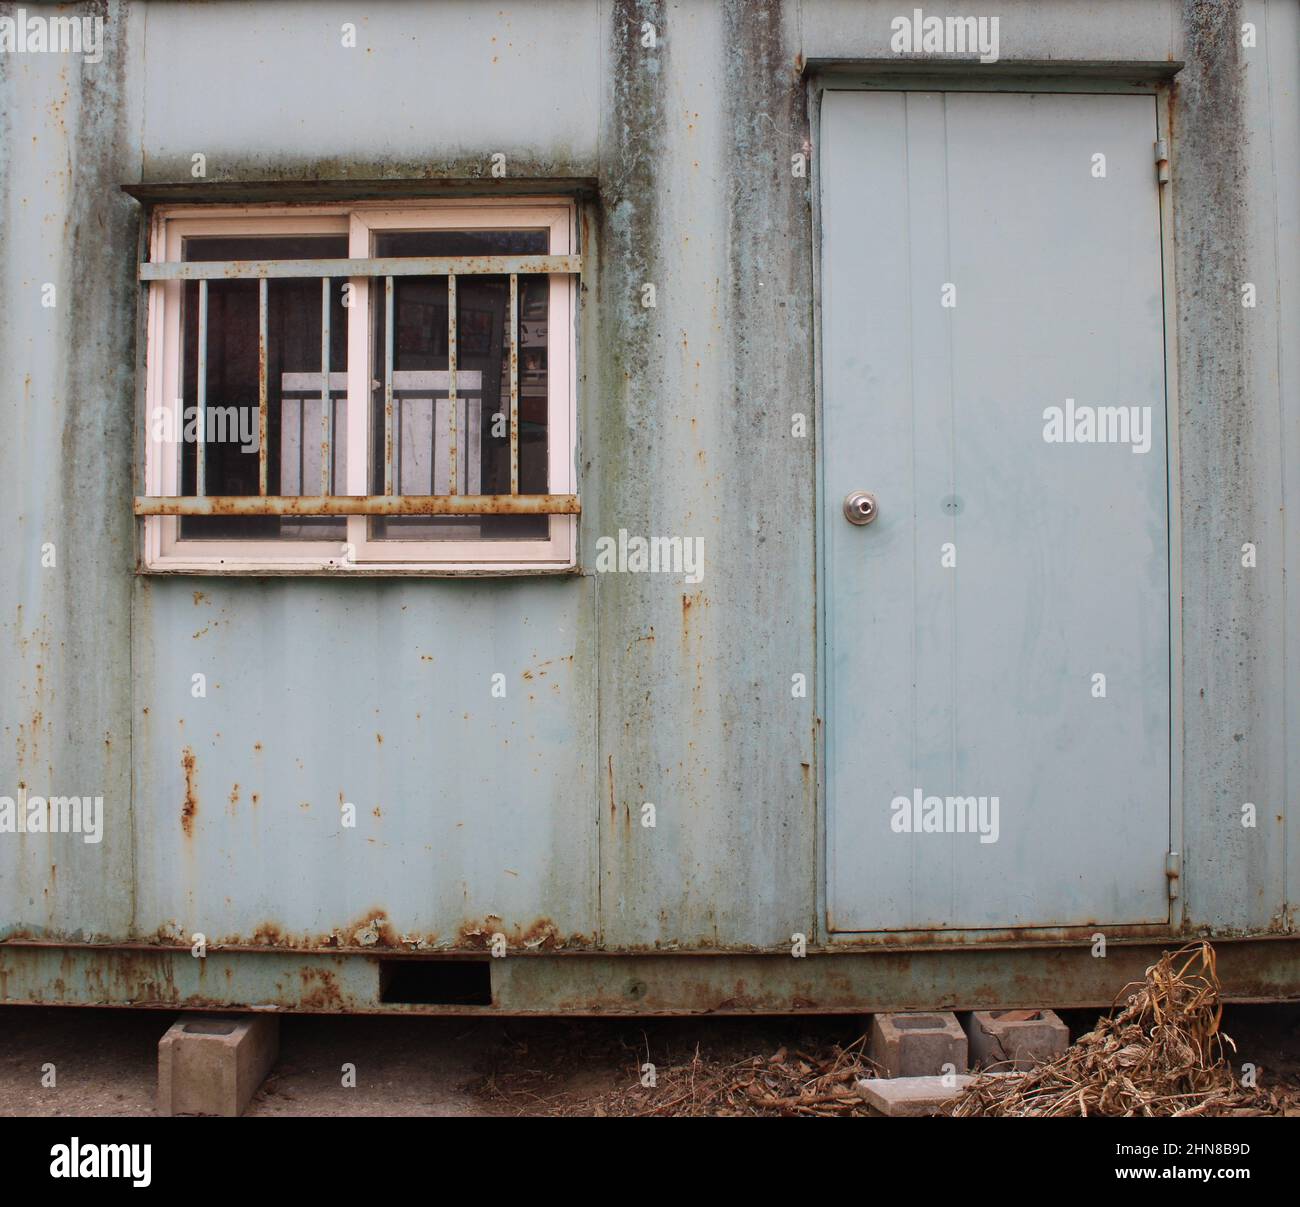 Weathered green shipping container office near construction site Stock Photo